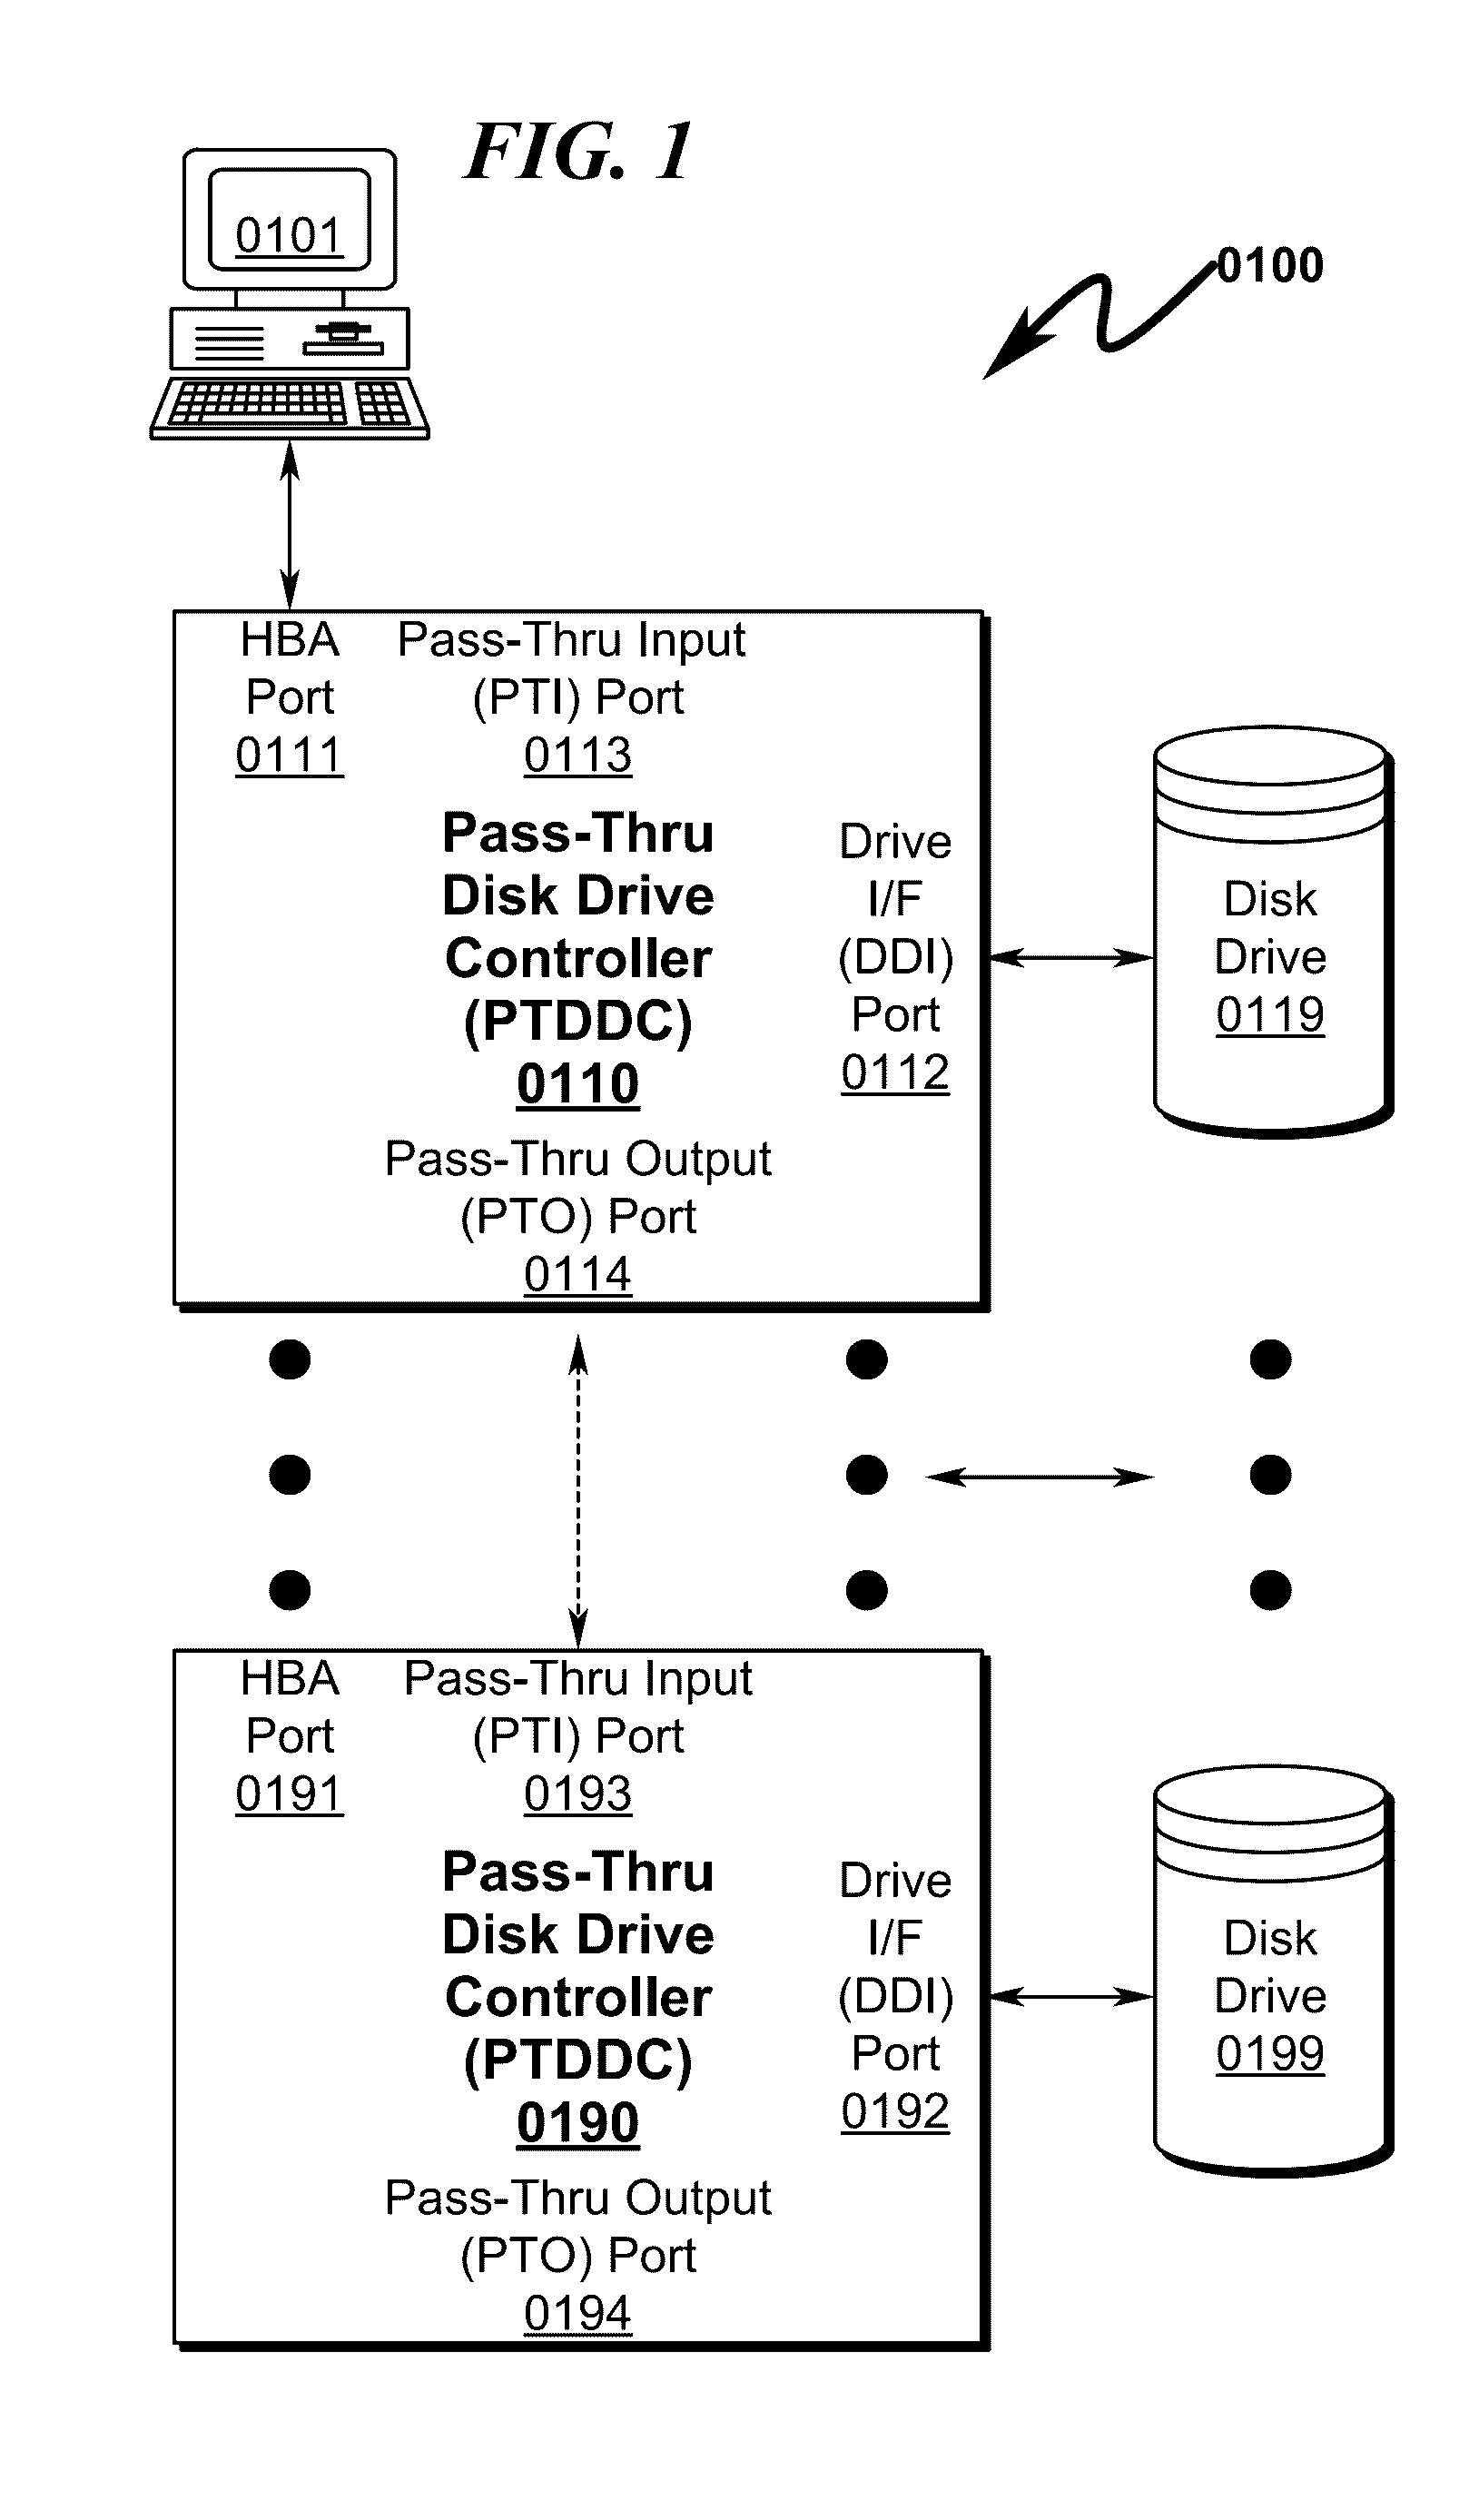 Raid hot spare system and method